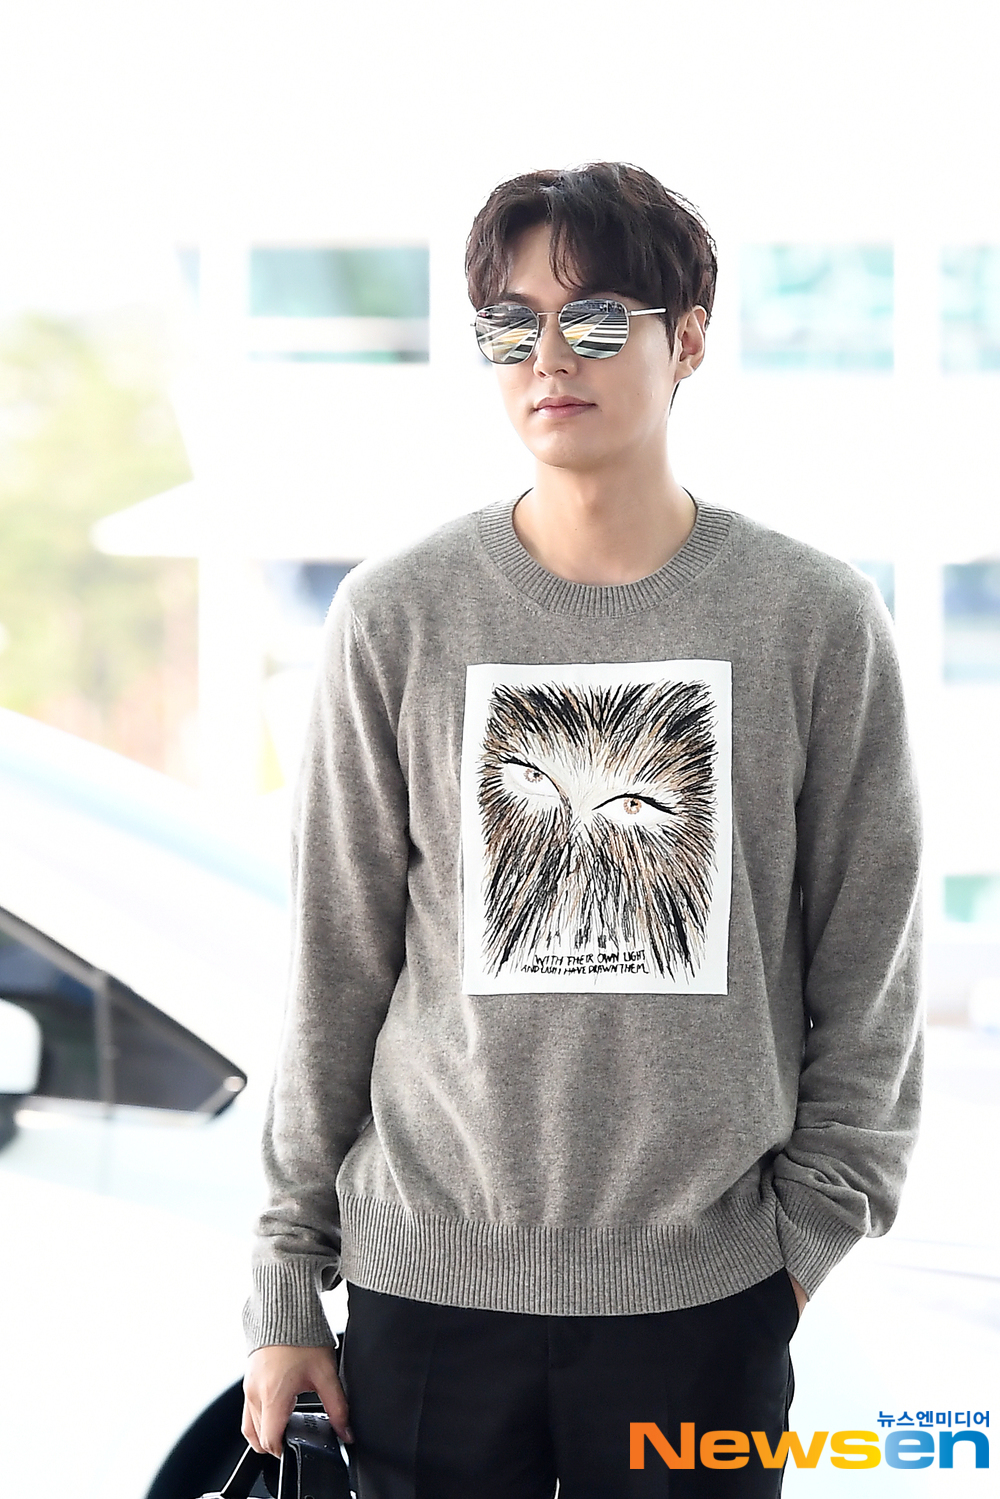 Actor Lee Min-ho (LEE MIN HO) departed for Indonesia Bali, a magazine photo shoot car, via the Incheon International Airport in Unseo-dong, Jung-gu, Incheon, on the afternoon of October 3.Actor Lee Min-ho (LEE MIN HO) is leaving for Indonesia Bali, showing off airport fashion.exponential earthquake